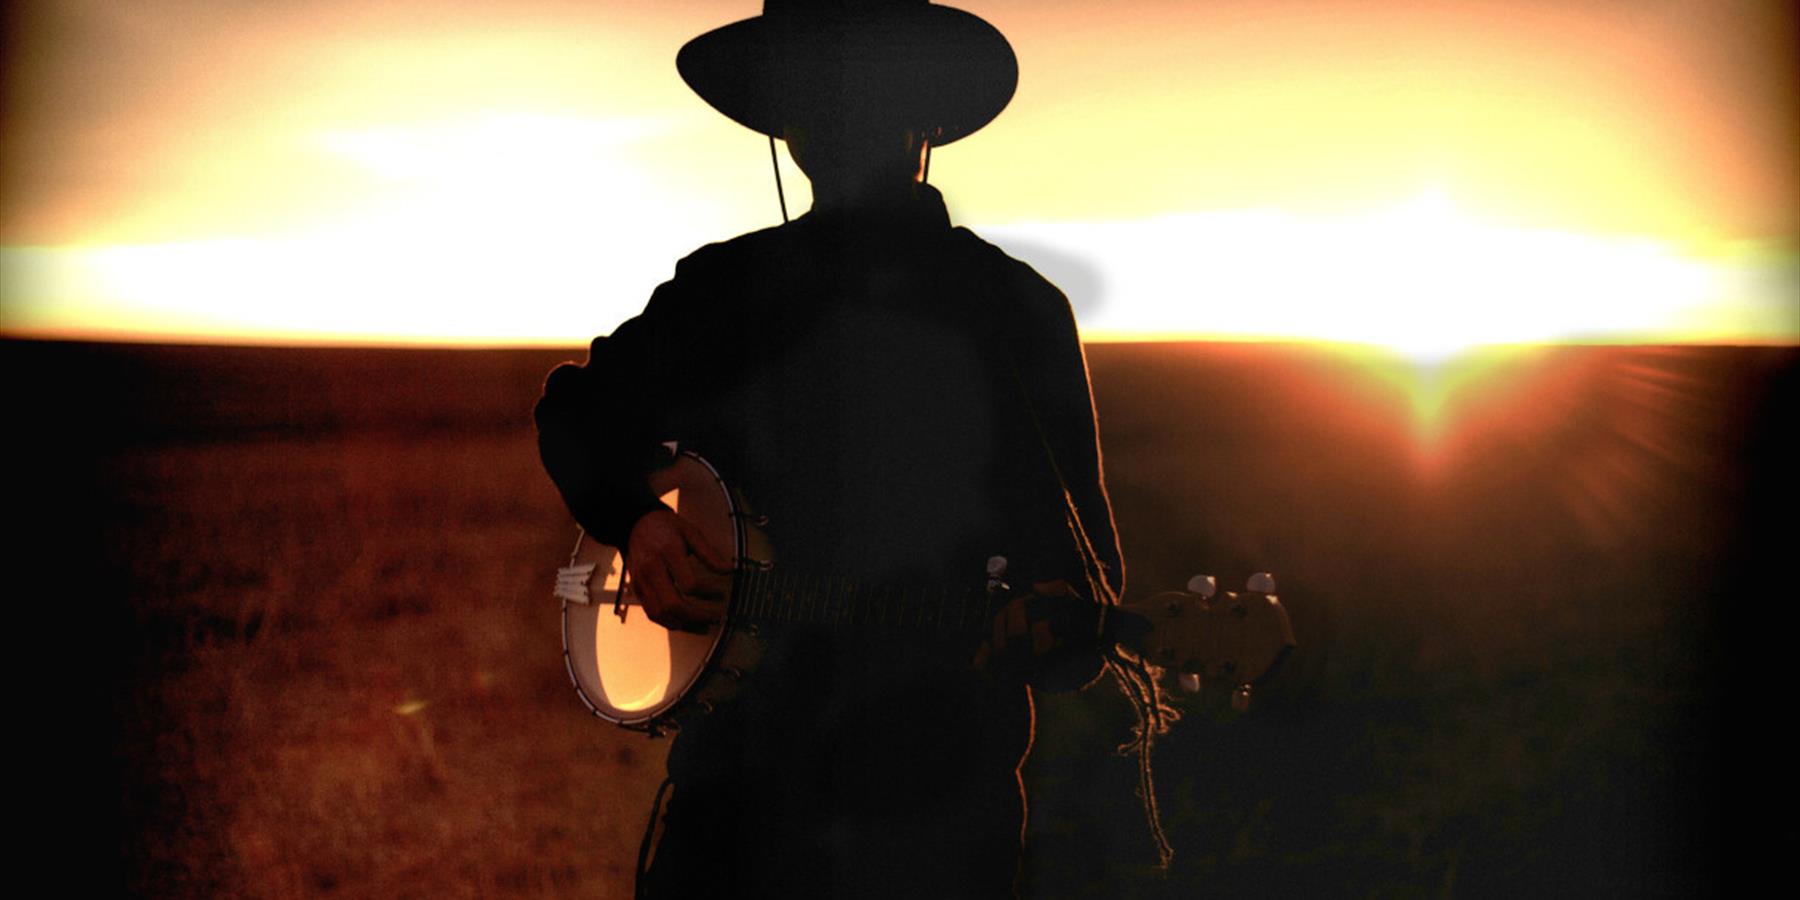 Silhouette of a person wearing a cowboy hat and playing a banjo